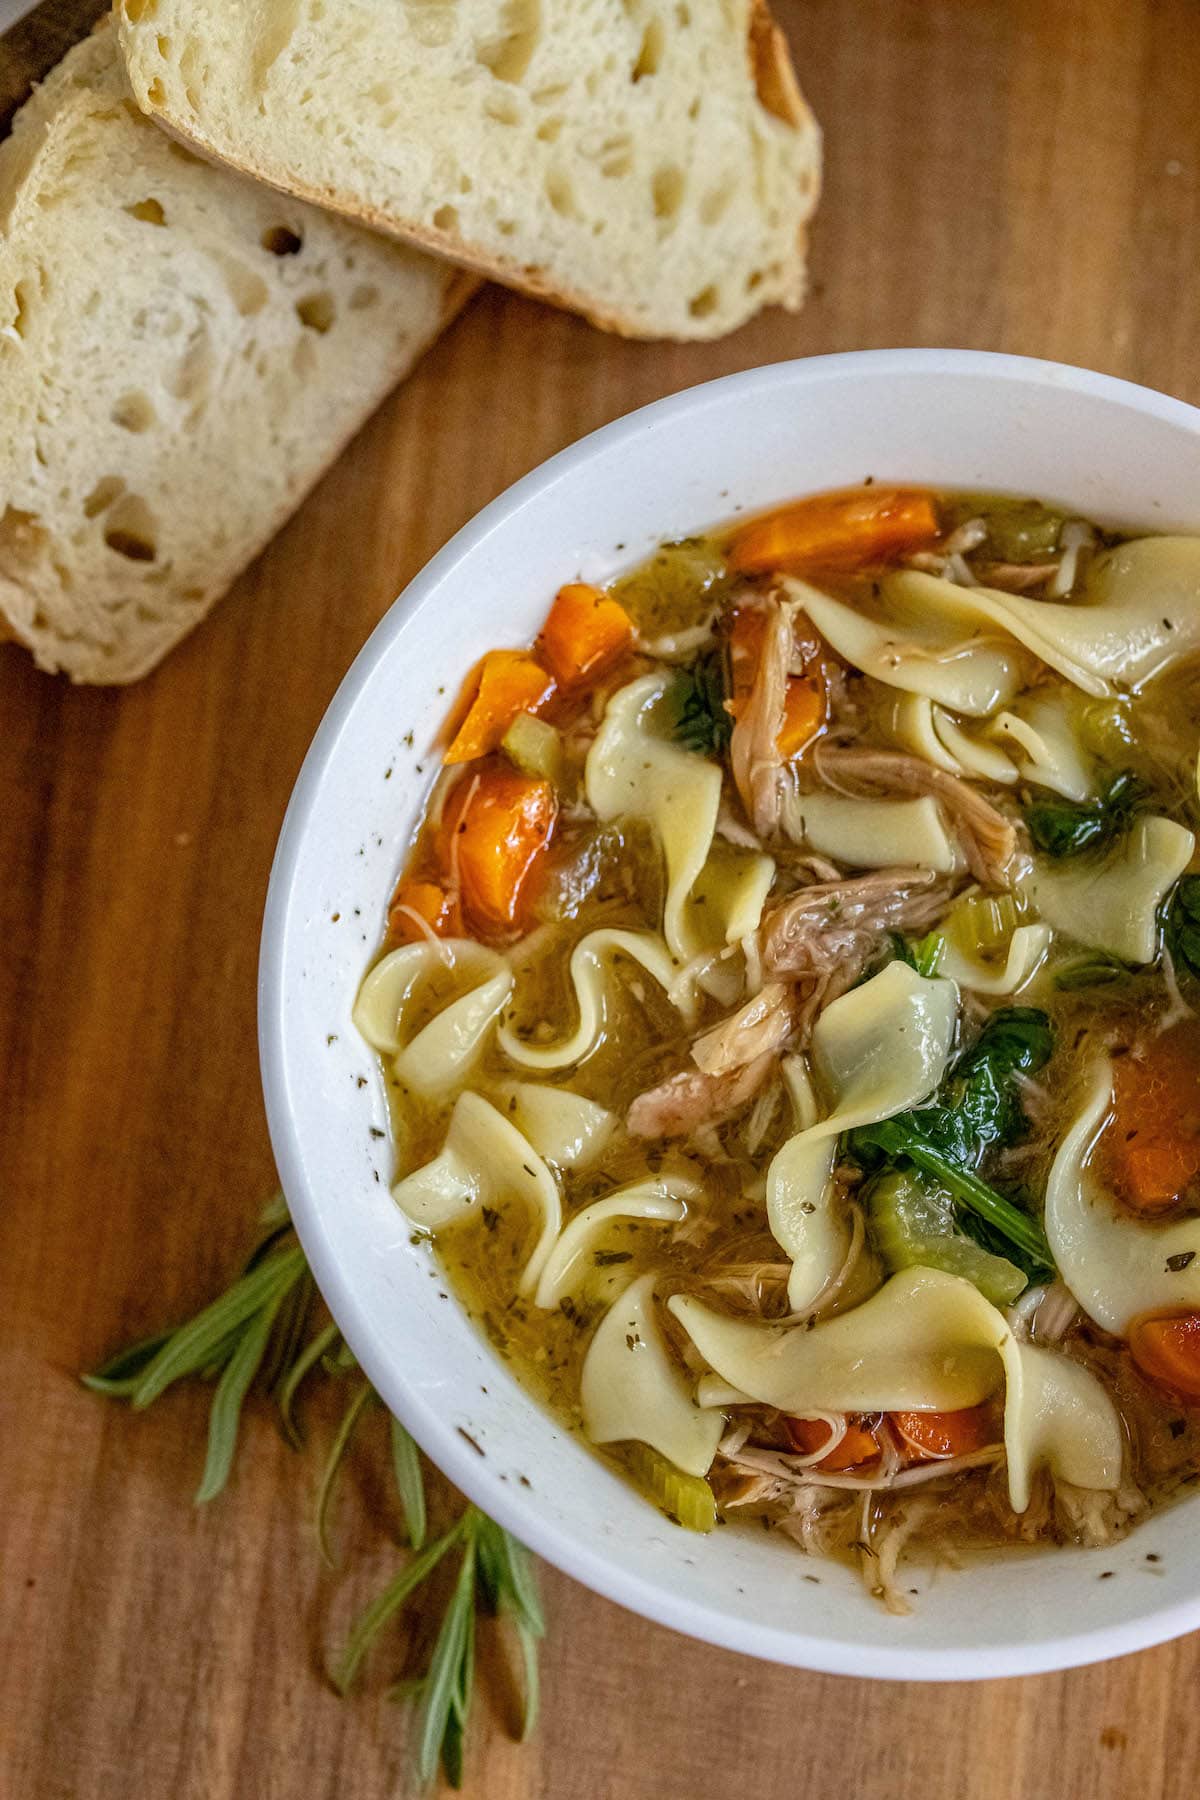 egg noodles, turkey, spinach, carrots, celery, and stock in a bowl